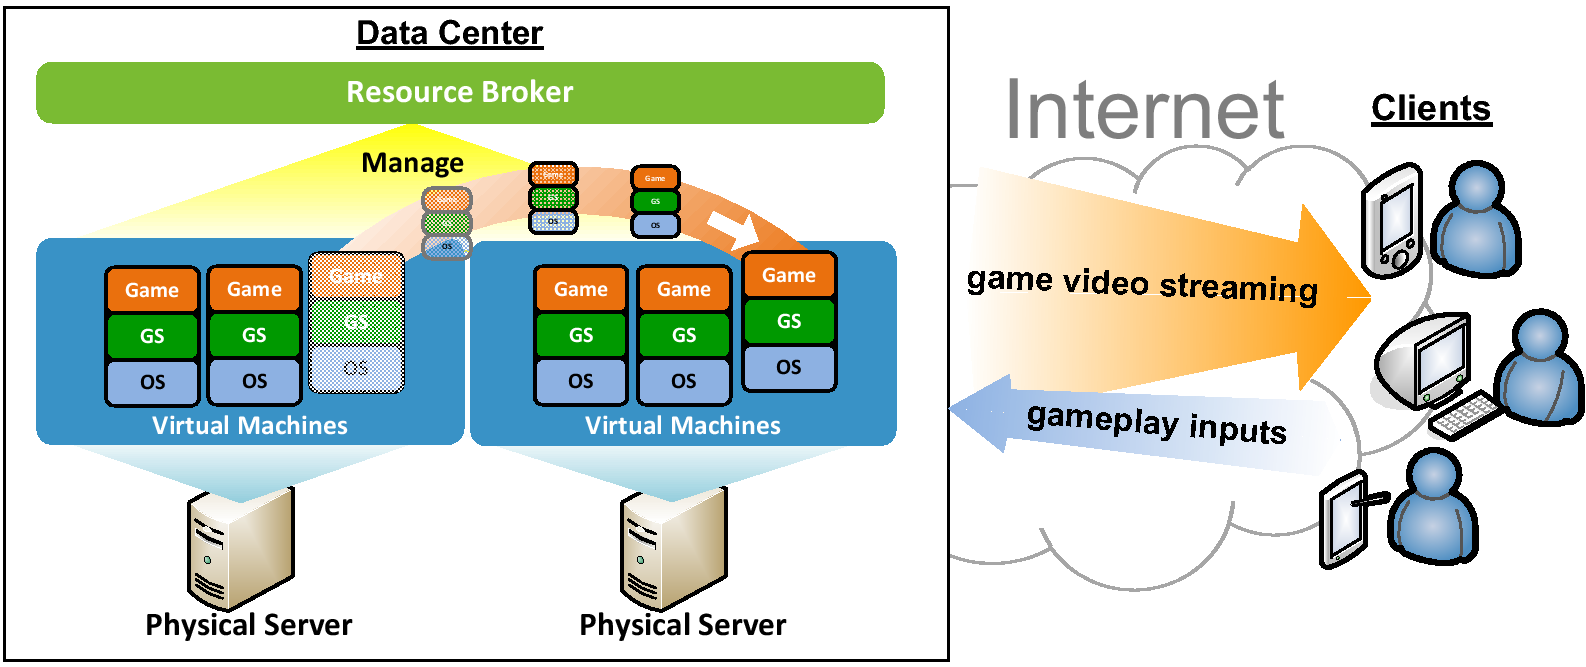 Cloud gaming explained: what is it, and what services are available?